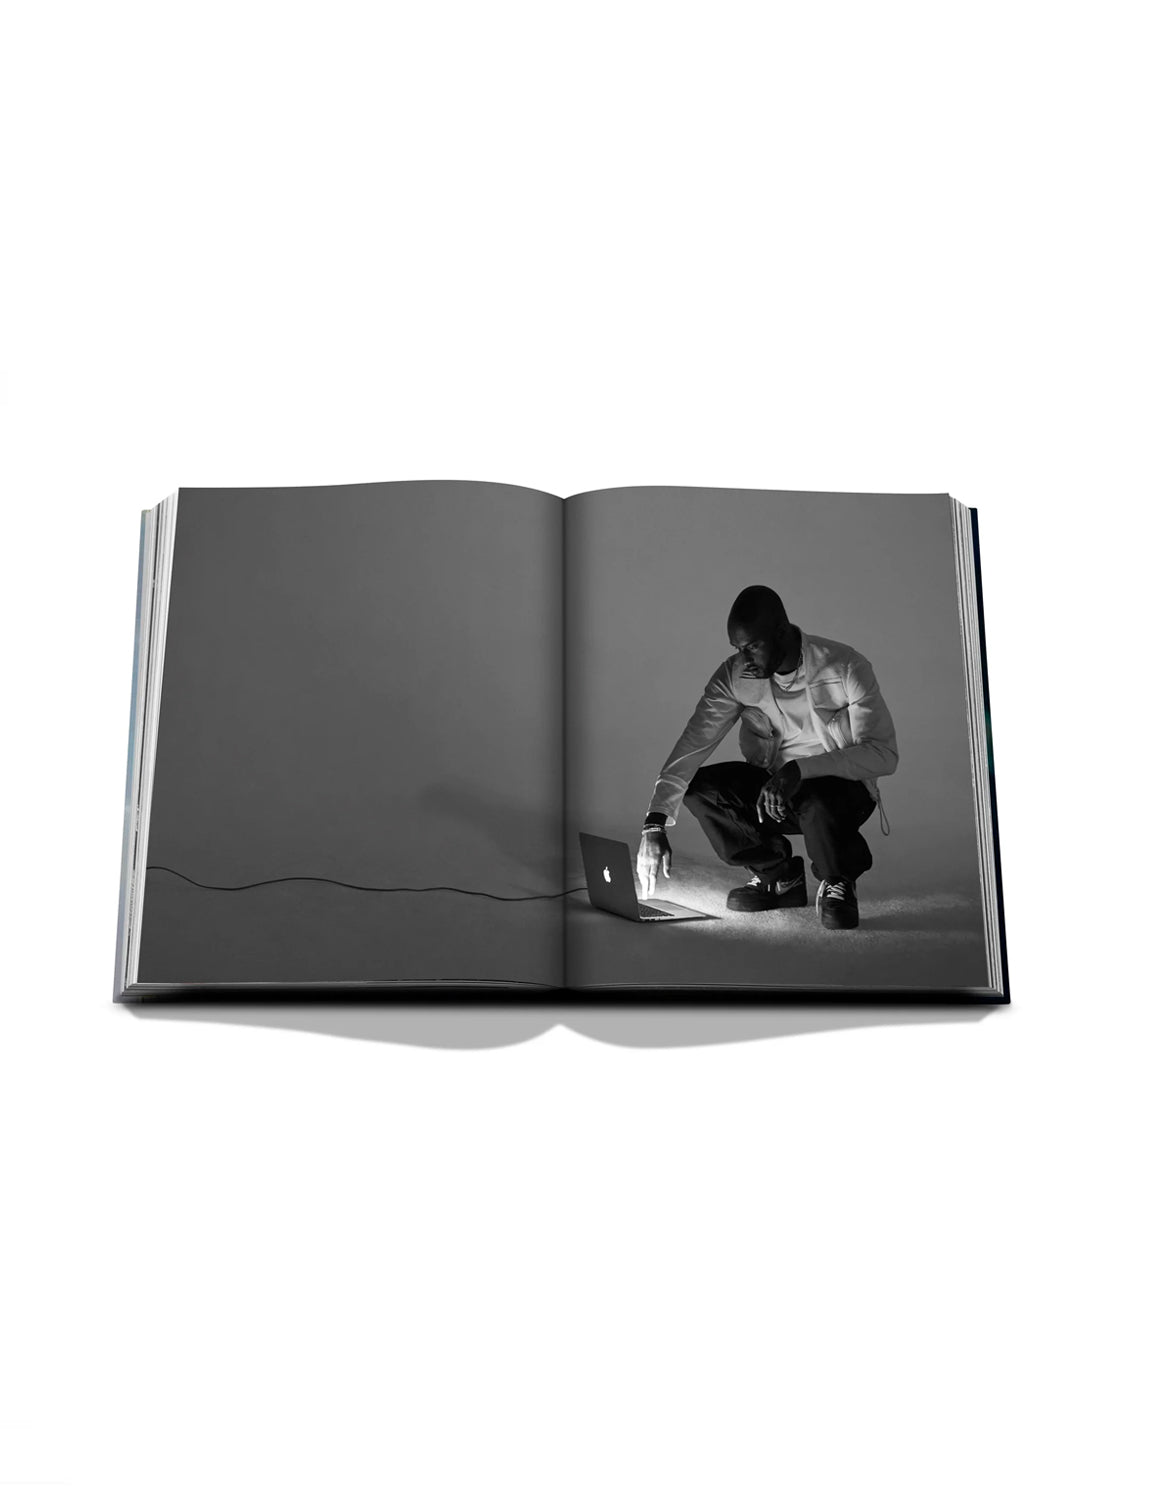 Louis Vuitton: Virgil Abloh (Classic Cartoon Cover) - Assouline Coffee  Table Book: Madsen, Anders Christian: 9781649801524: : Books